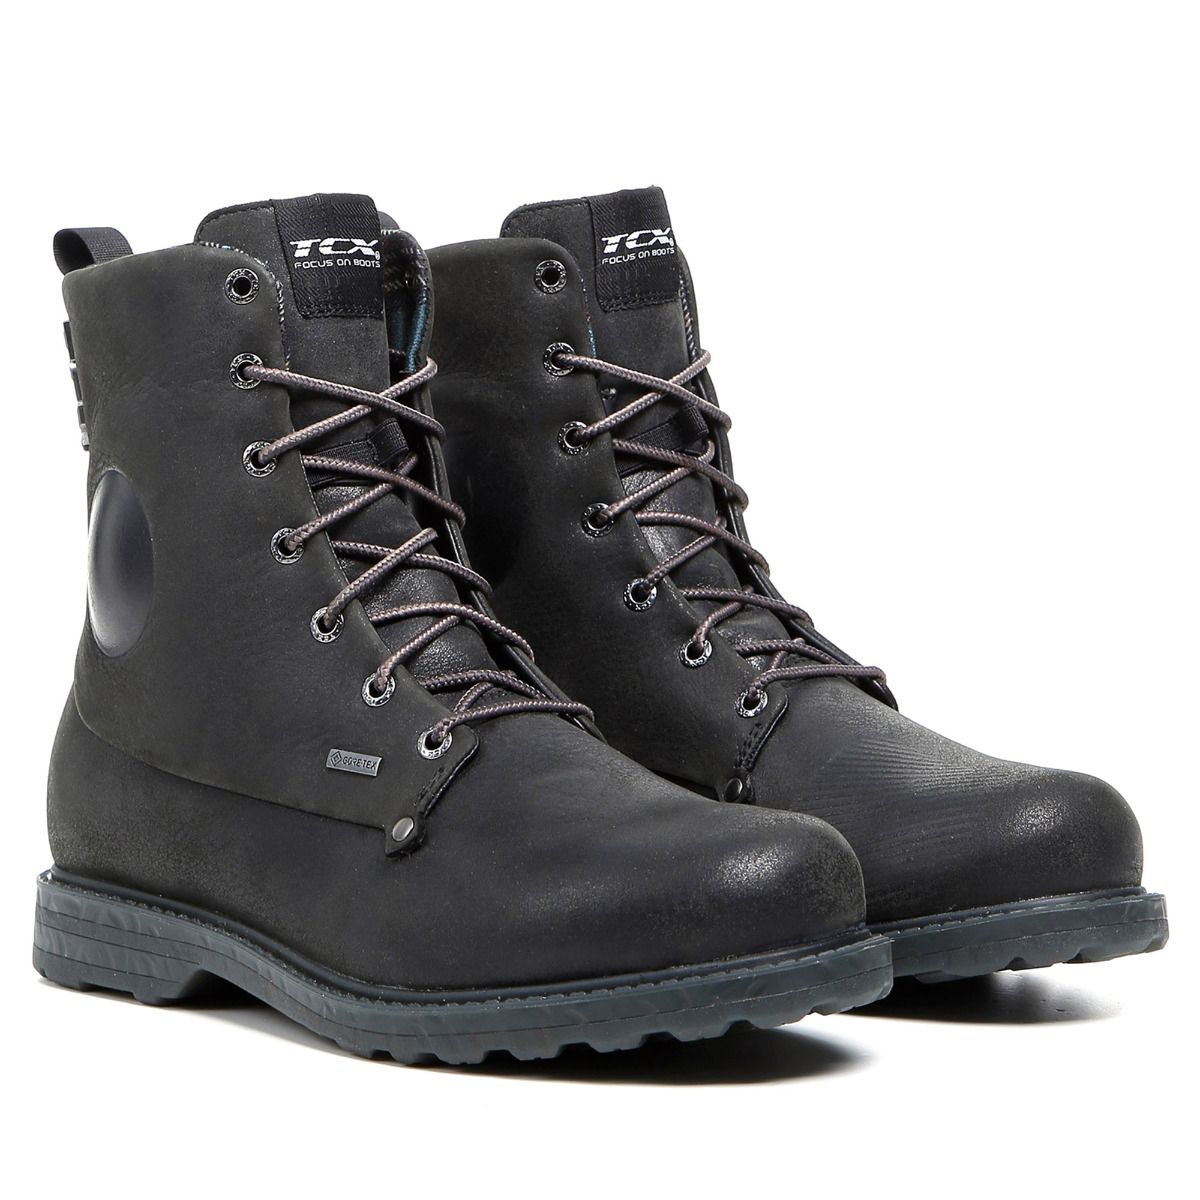 Image of TCX Boot Blend 2 Gore-Tex Black Size 46 ID 8000958234405